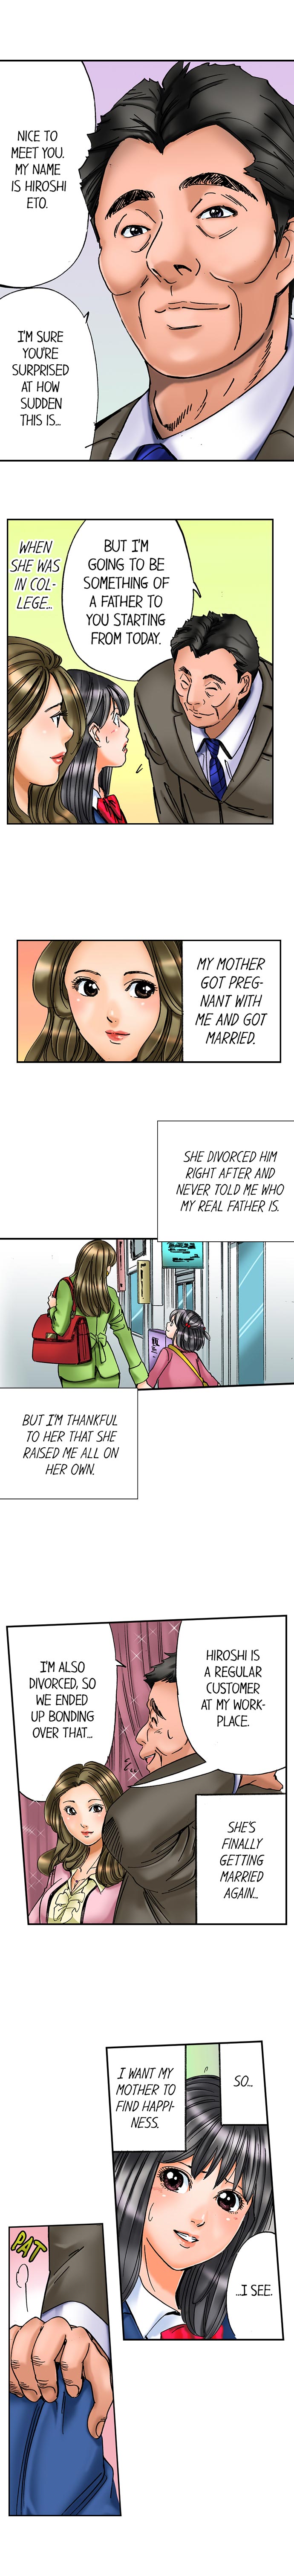 [MAI] A Step-Father Aims His Daughter Ch. 1 [ENG] 